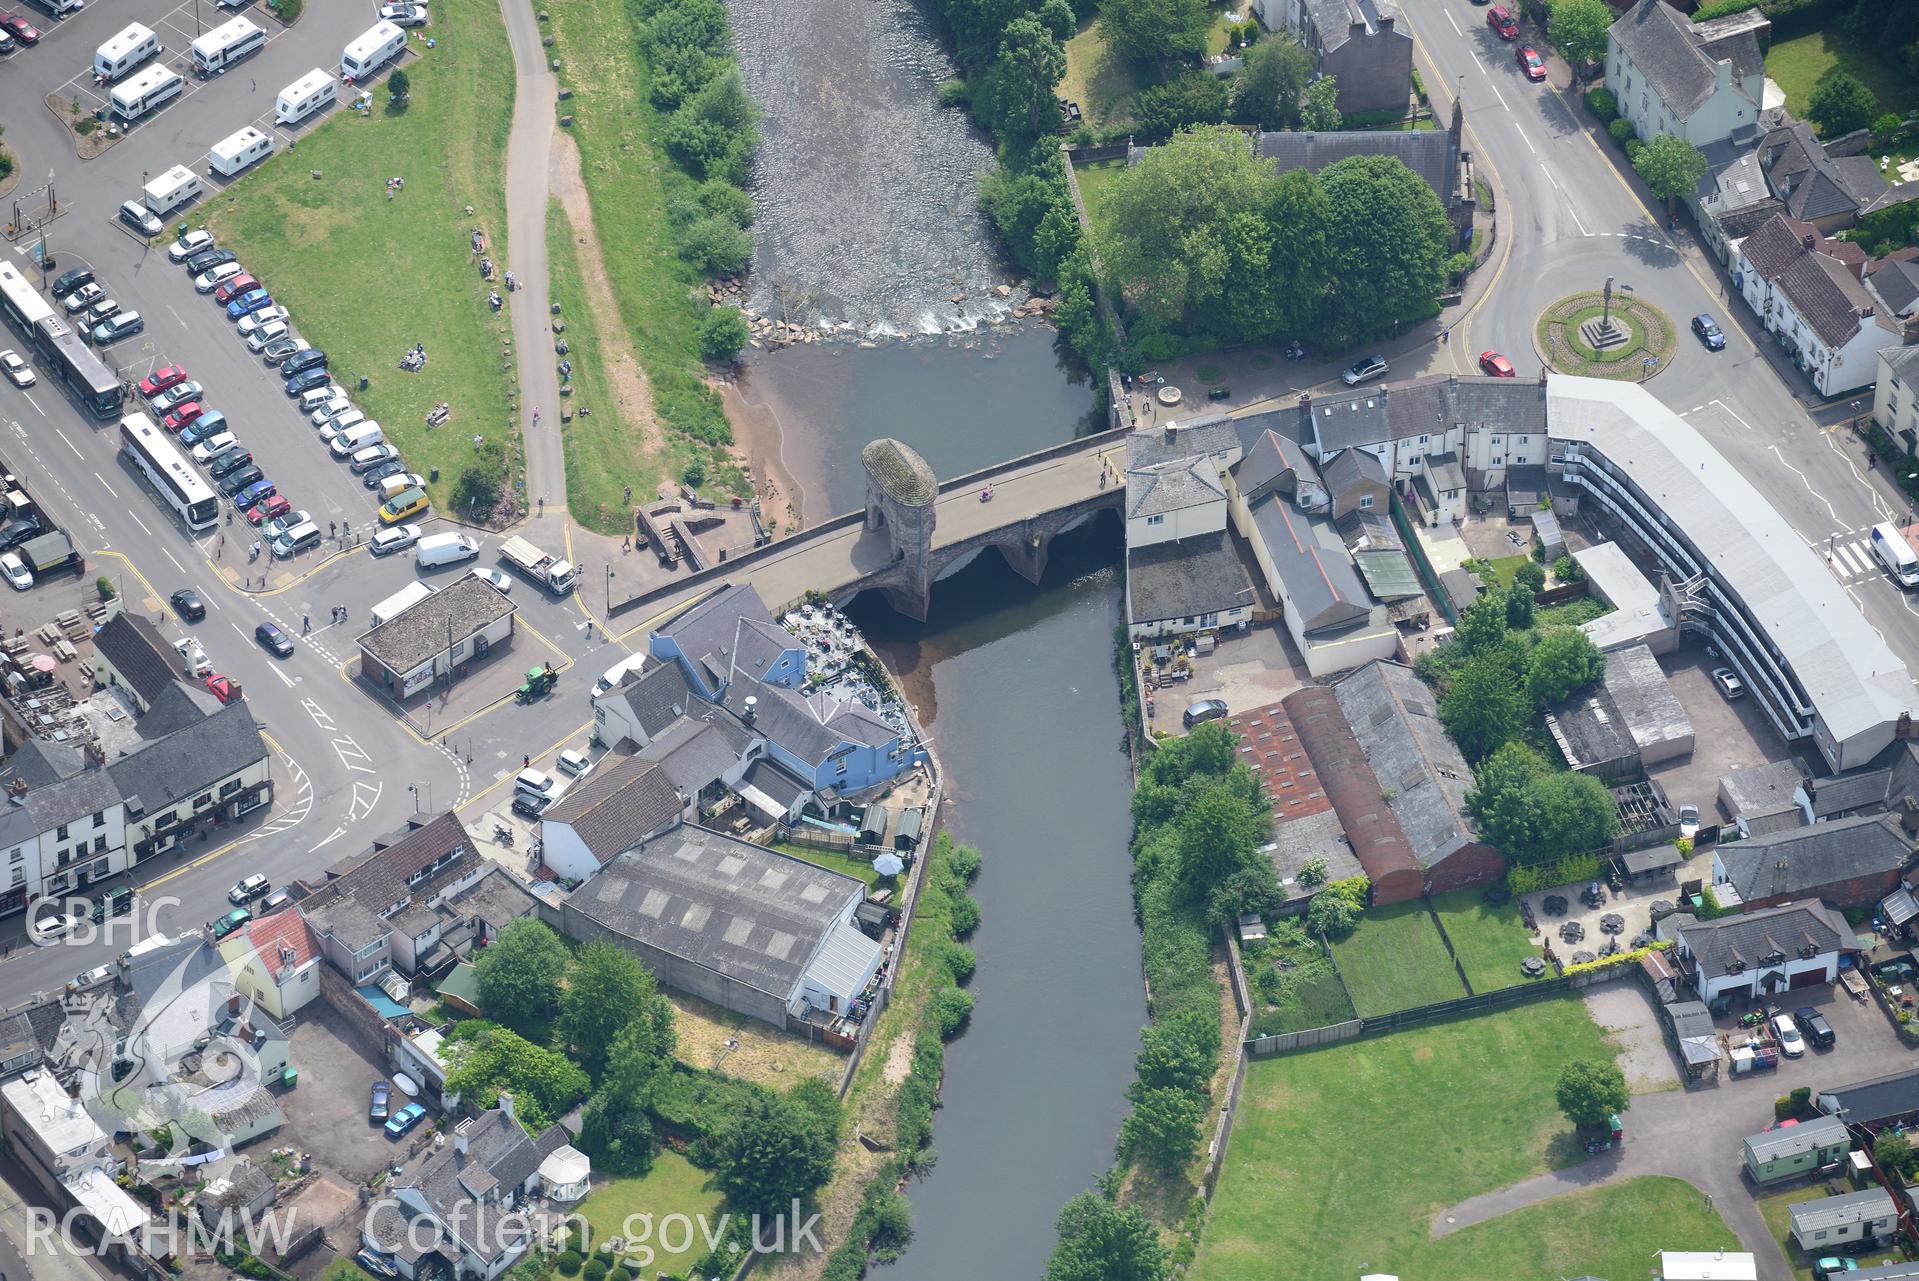 Monnow bridge and gate; St. Thomas' Square and St. Thomas's Church, Monmouth. Oblique aerial photograph taken during the Royal Commission's programme of archaeological aerial reconnaissance by Toby Driver on 11th June 2015.